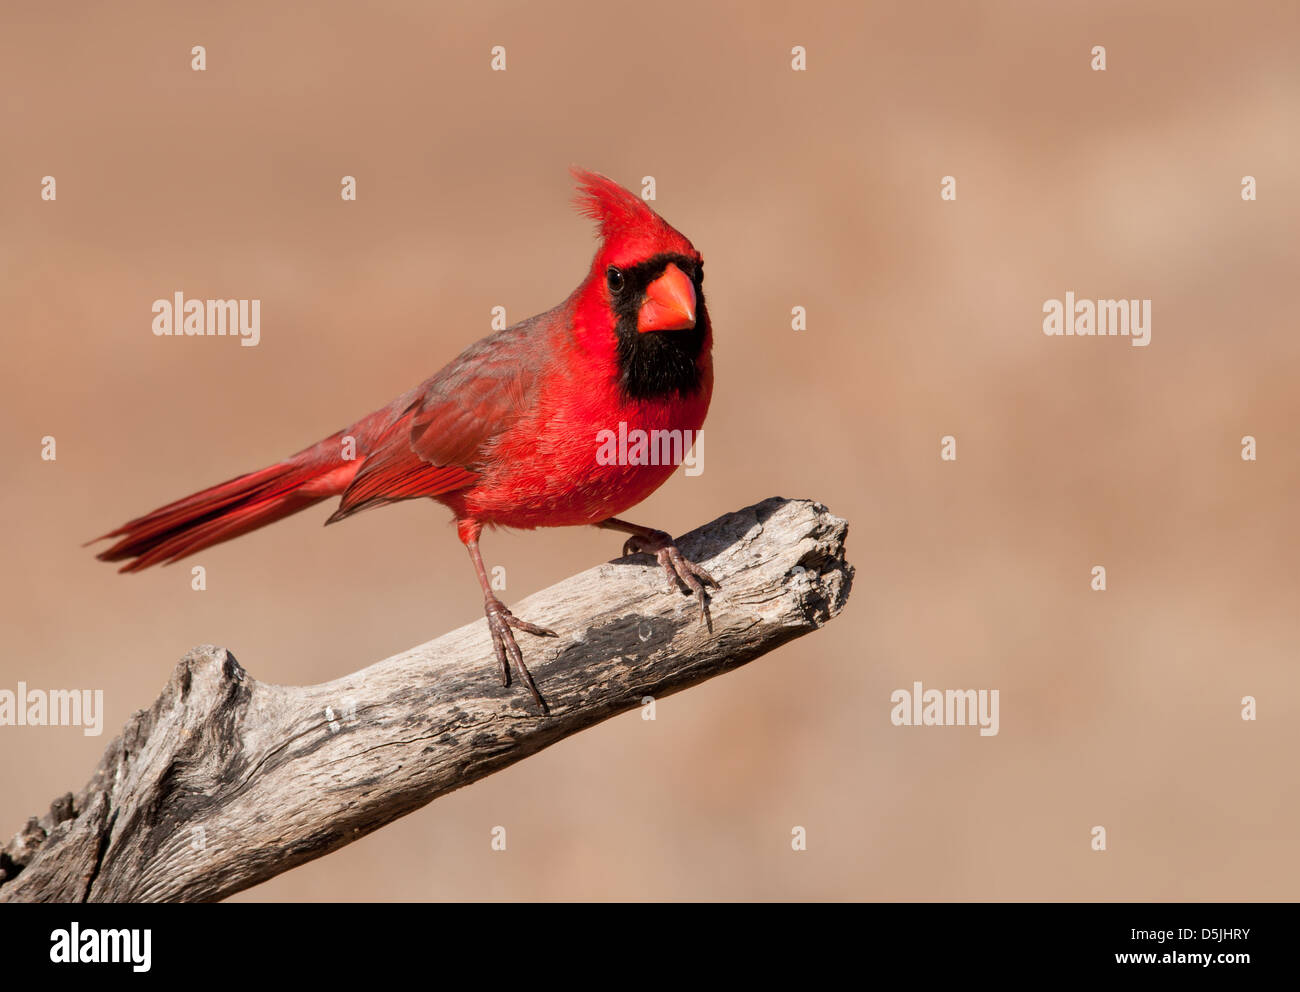 Bright red Cardinalis cardinalis, Northern Cardinal male sitting on a dry limb against muted winter background Stock Photo